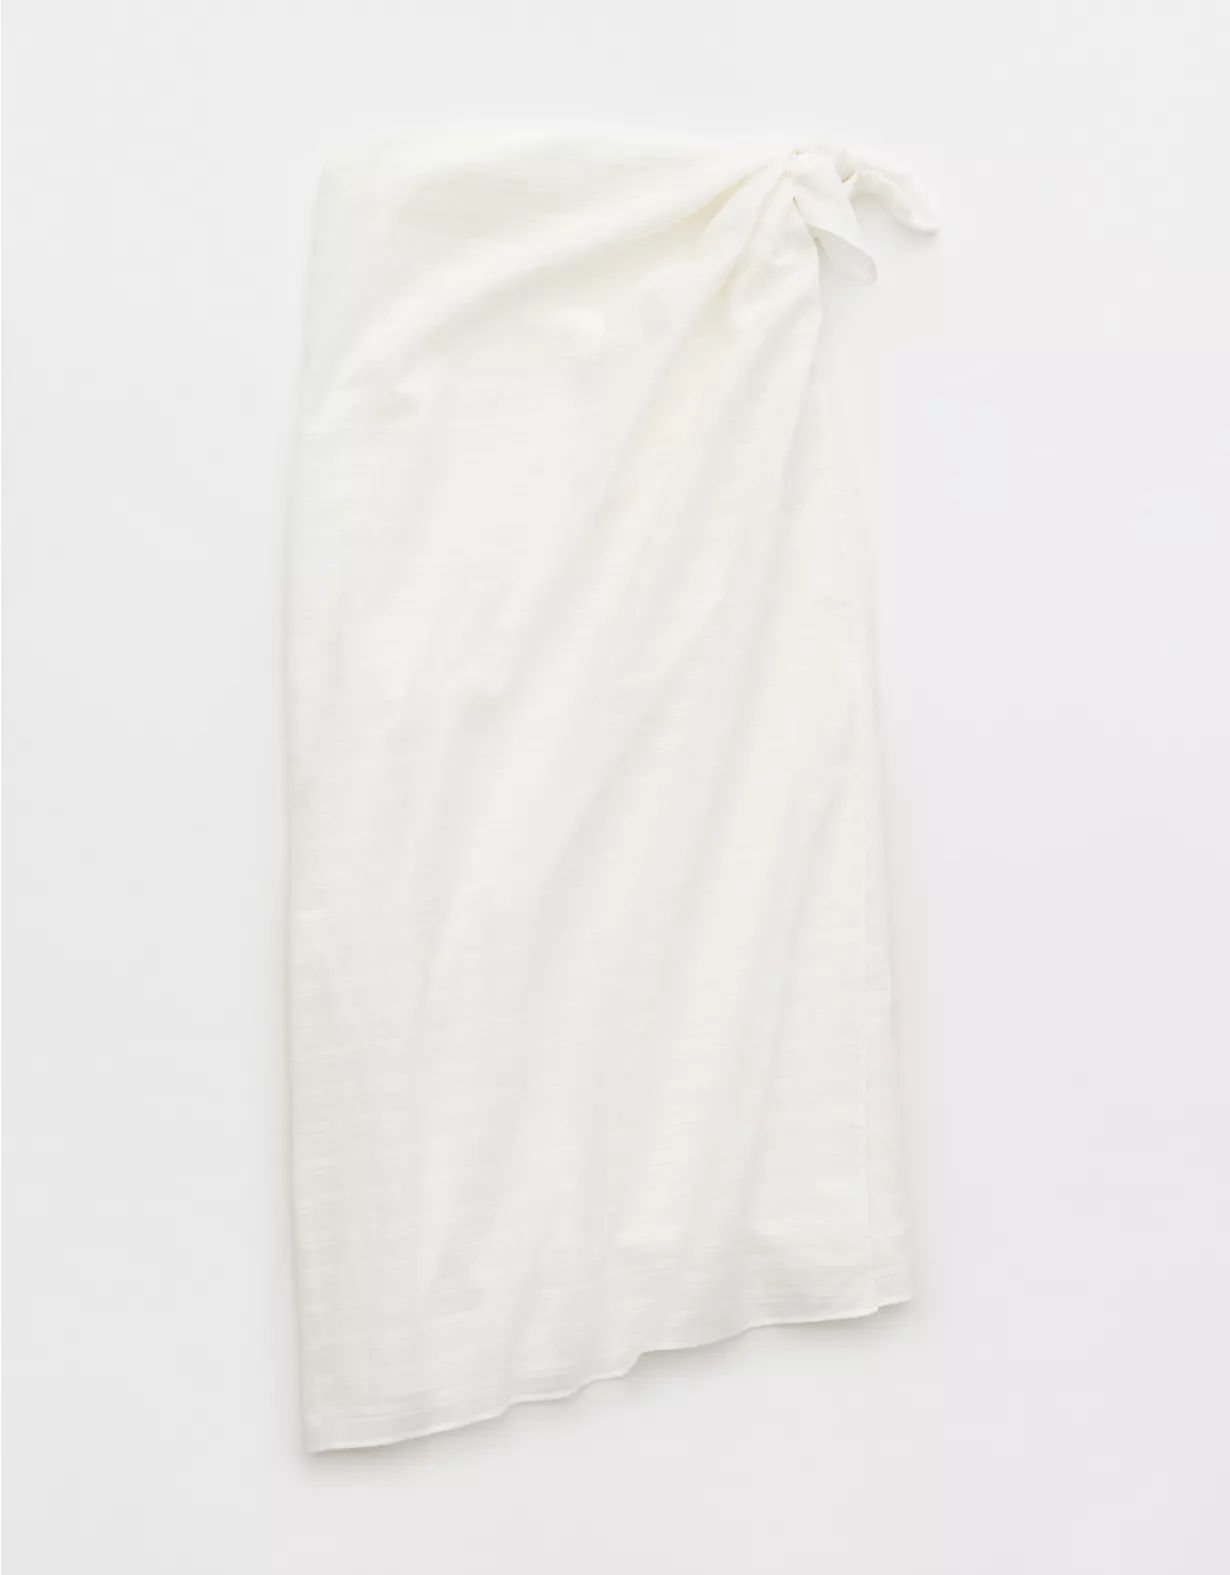 Aerie Textured Sarong | Aerie